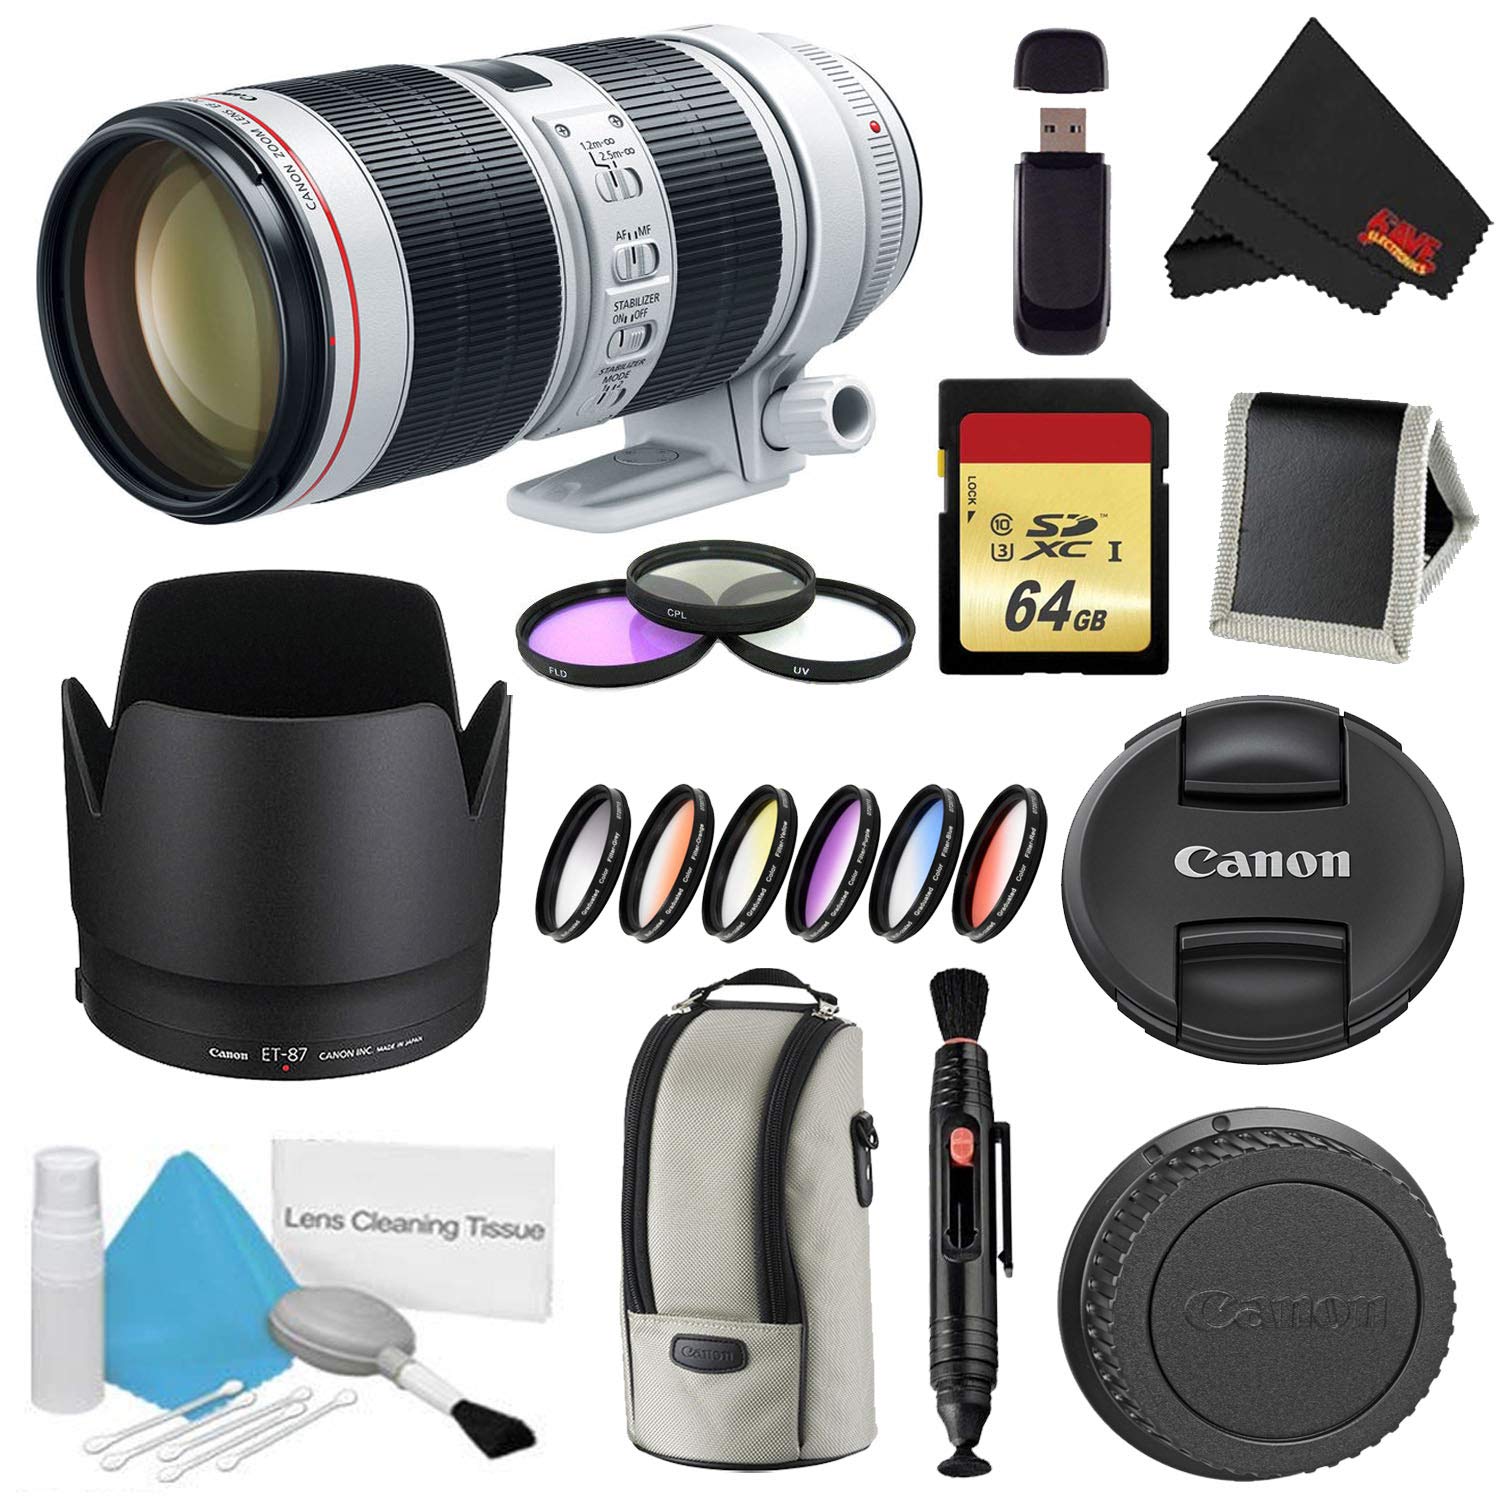 Canon EF 70-200mm f/2.8L is III USM Lens Bundle w/ 64GB Memory Card + Accessories, 3 Piece Filter Kit, and Color Multico